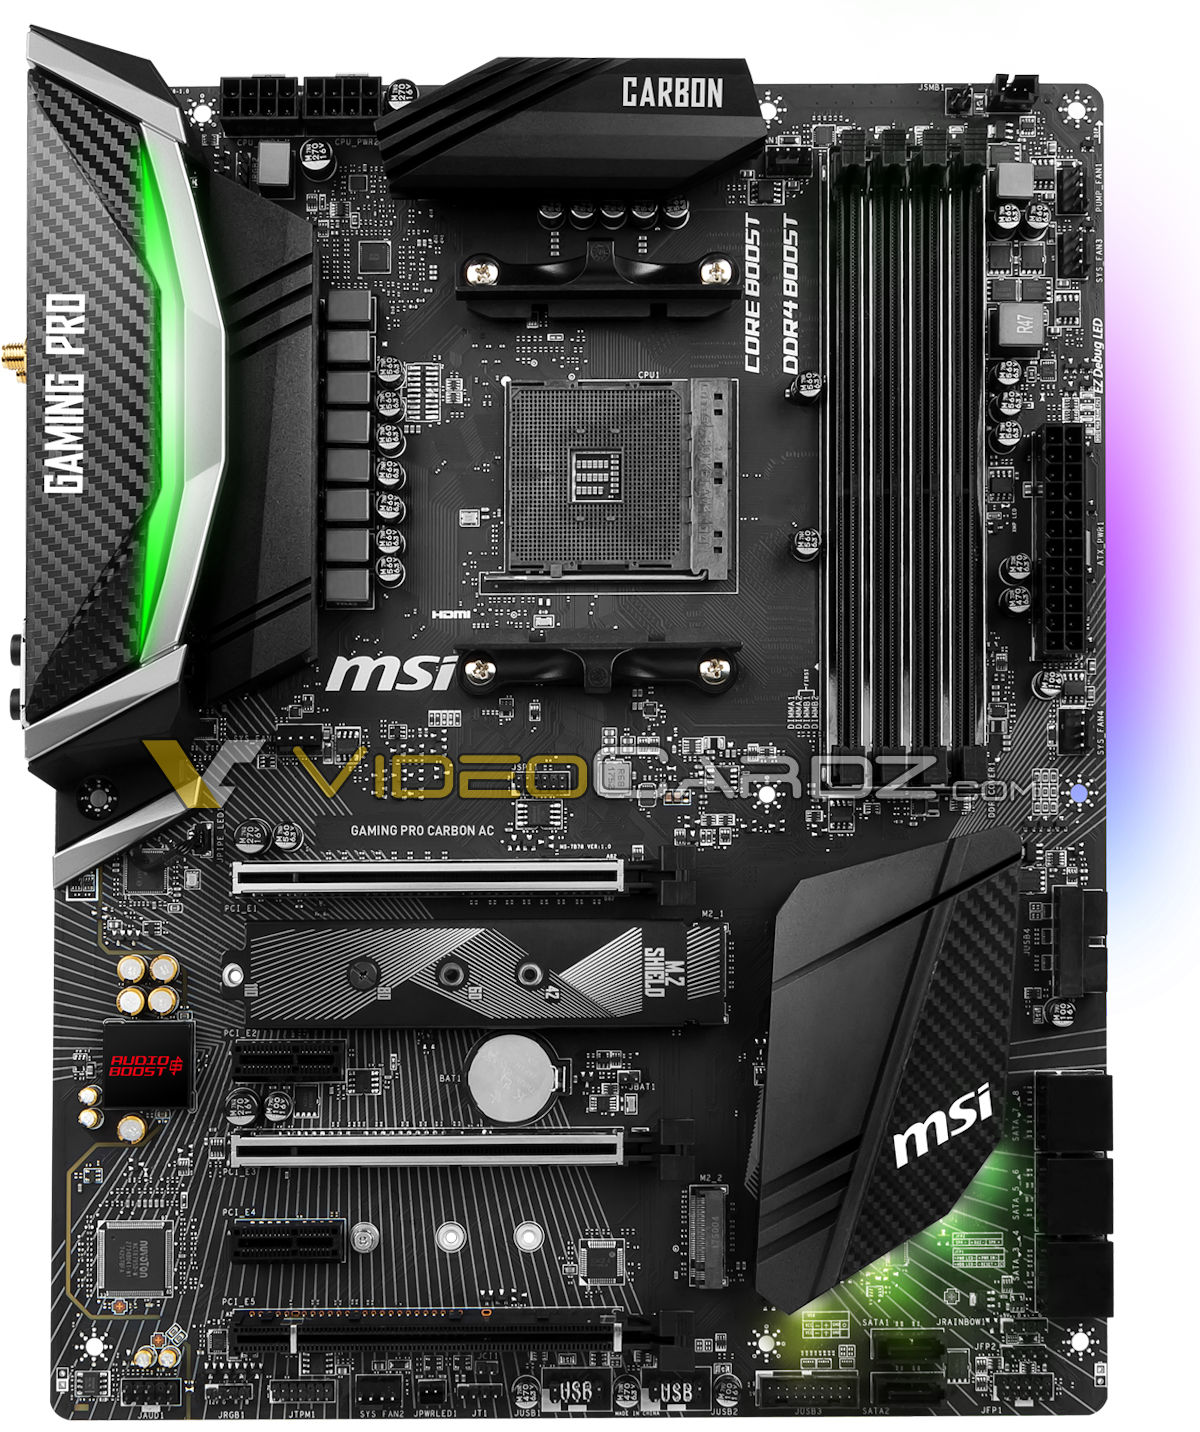 Beforehand Antagonism North America MSI X470 Gaming Pro Carbon AC motherboard leaked | VideoCardz.com